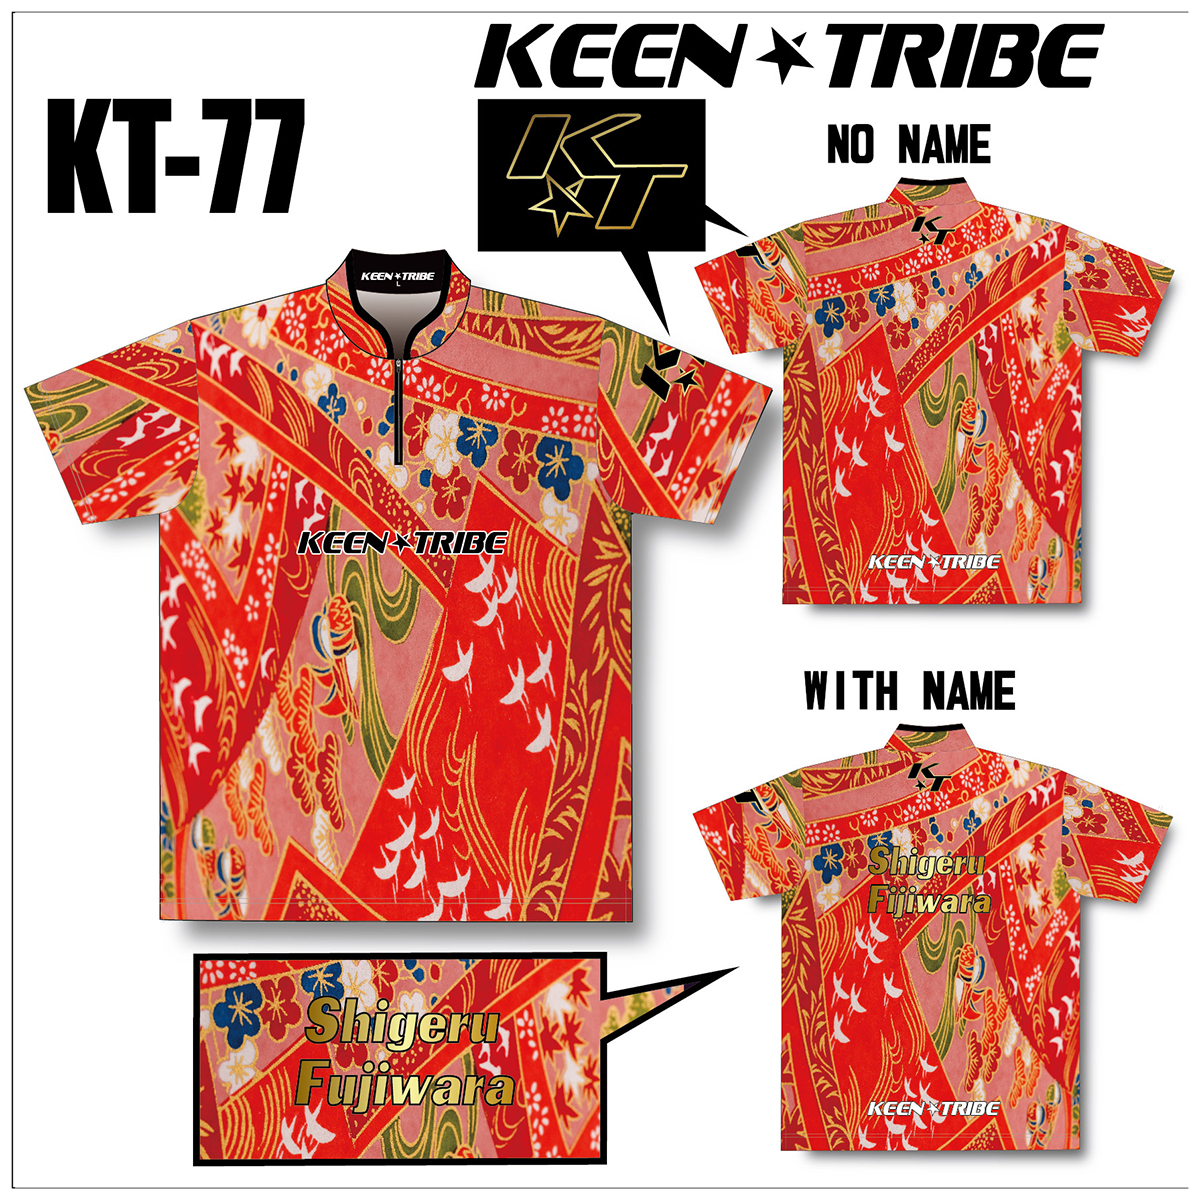 KEEN ★ TRIBE　KT-77(受注生産)